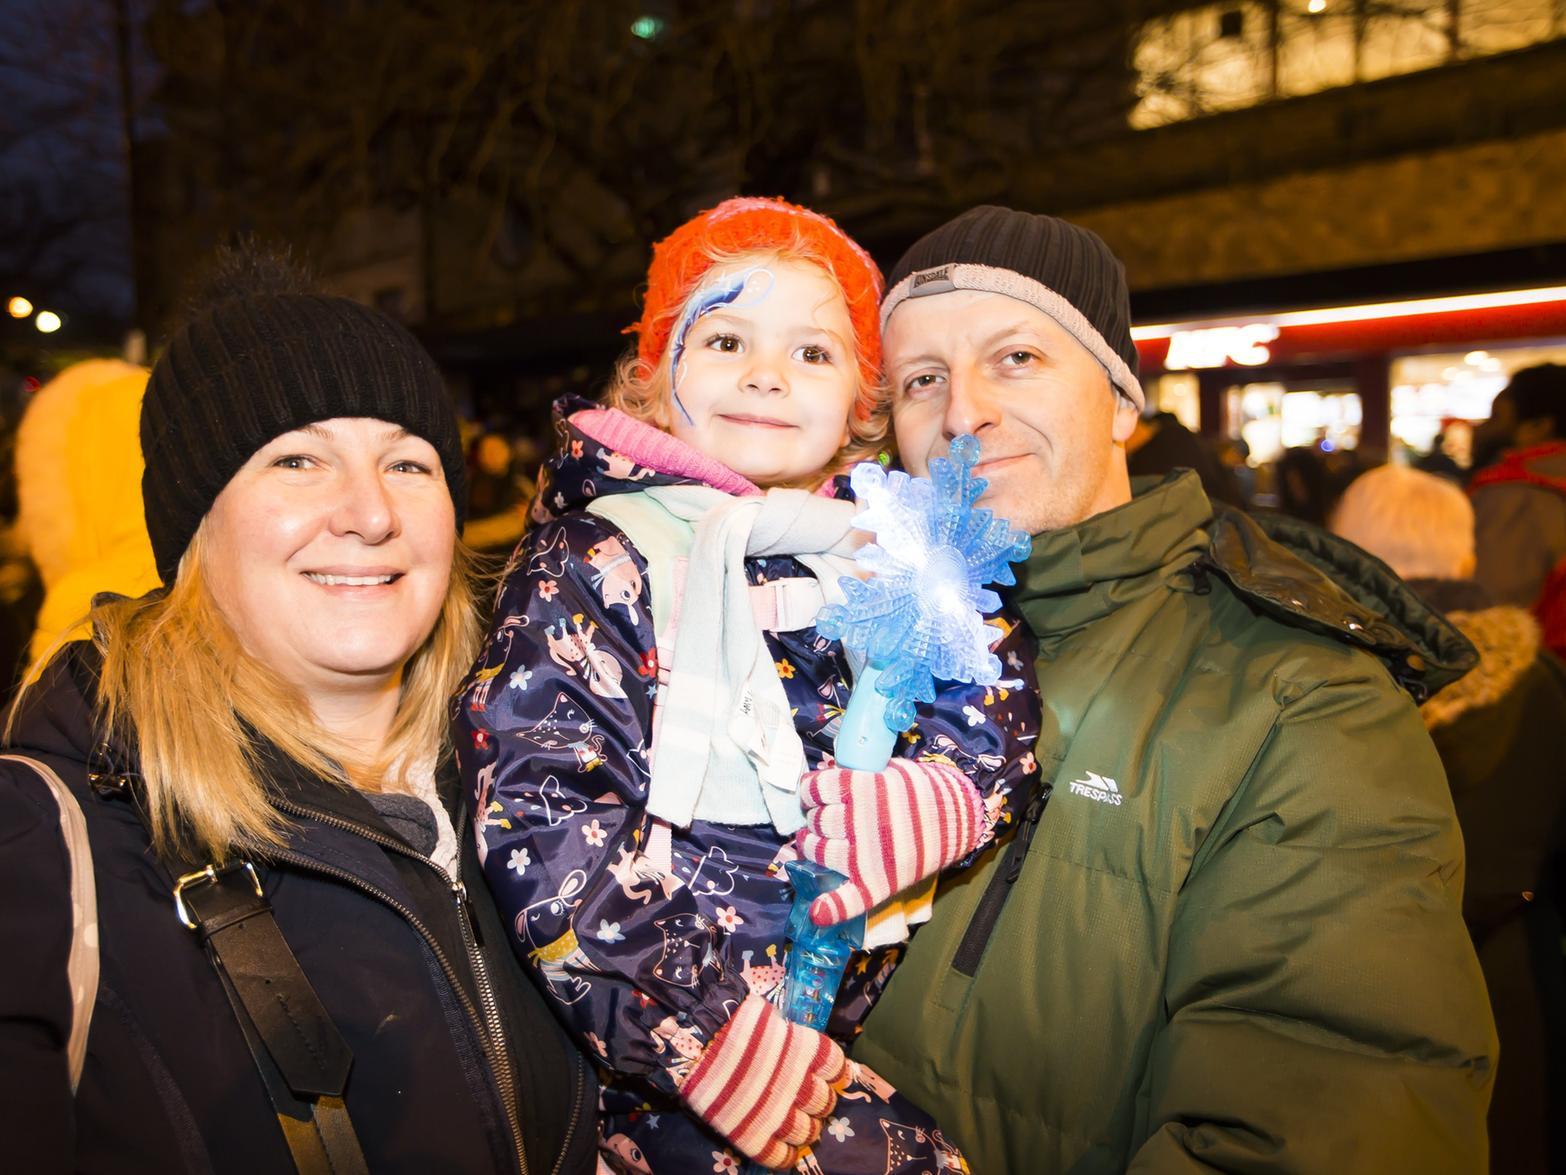 Halifax Christmas lights switch-on. From the left, Joanne Lawless, Amy Lawless, four, and Jim Lawless.